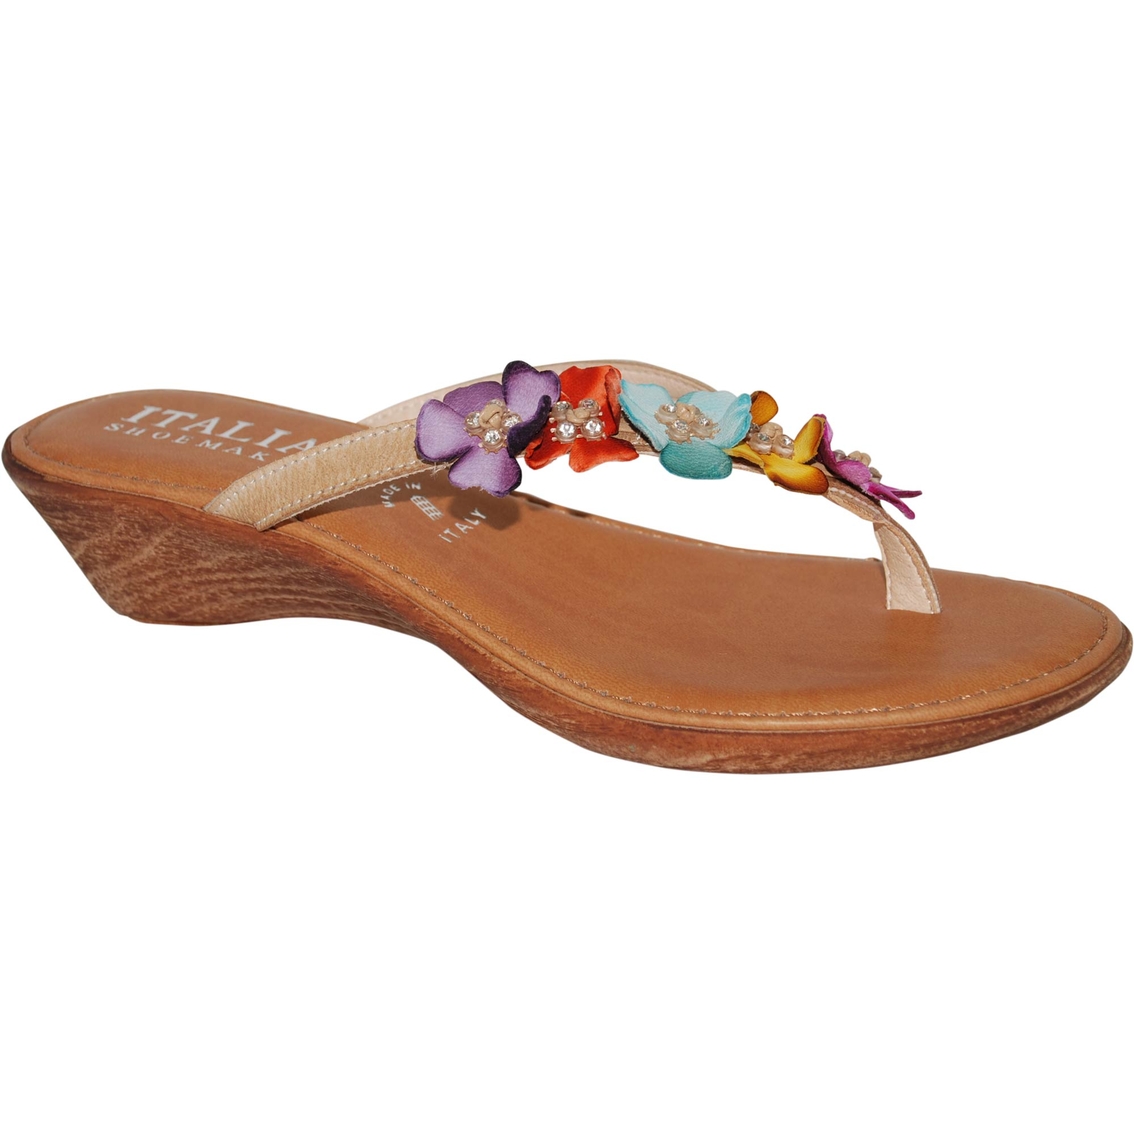 Italian Shoemakers Marisol Flowered Thong Wedge Sandals | Atg Archive ...